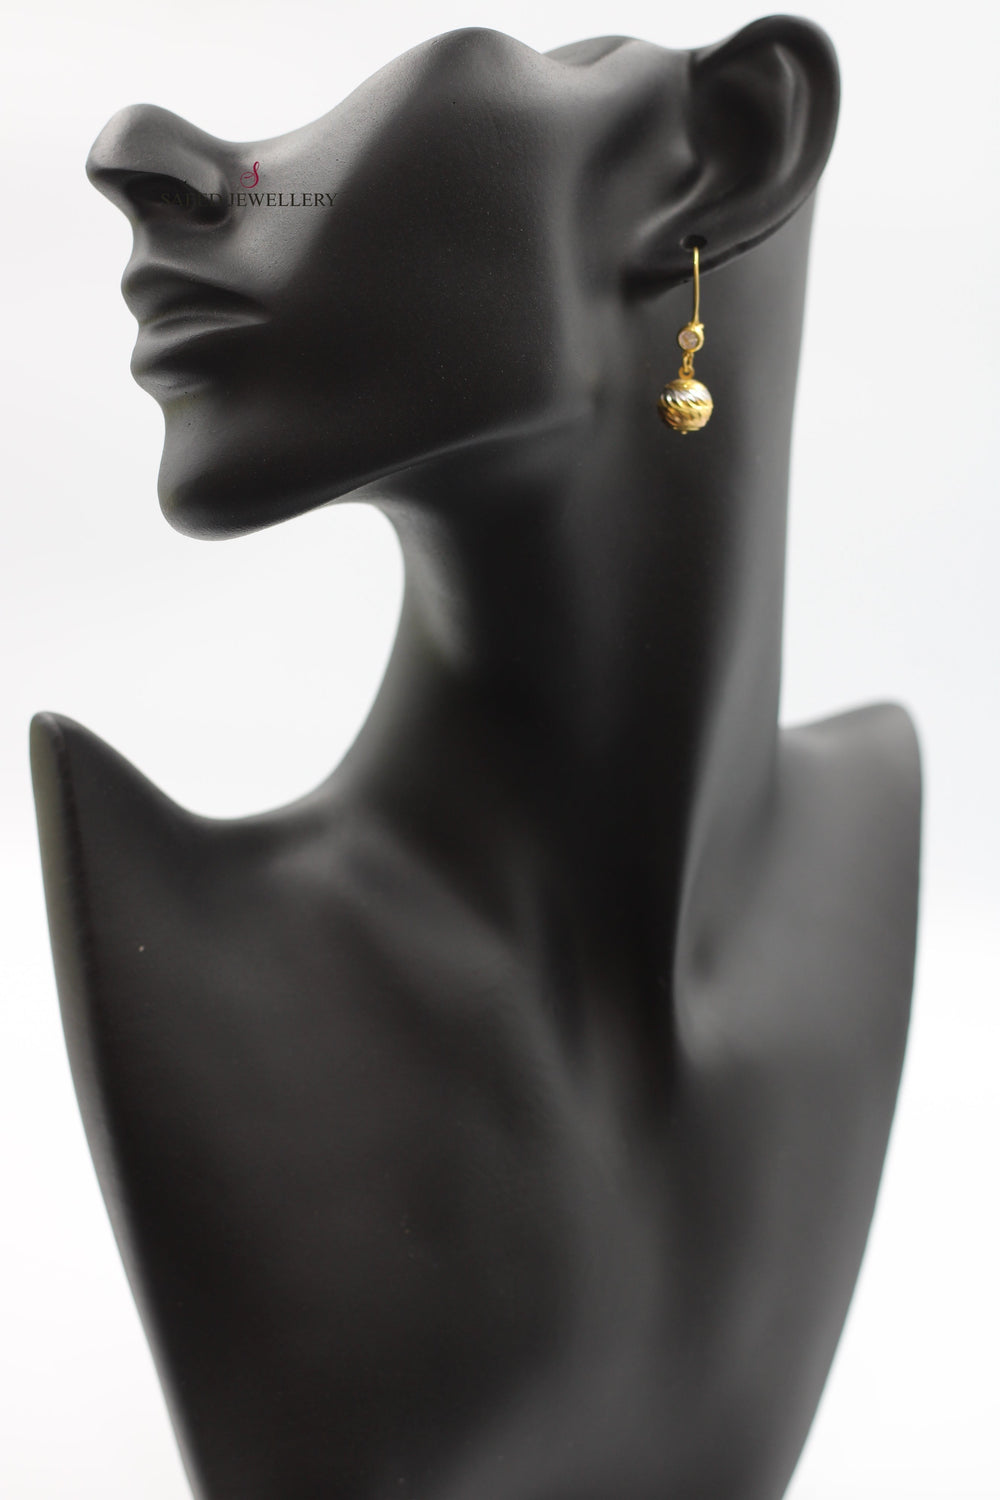 21K Bead Earrings Made of 21K Yellow Gold by Saeed Jewelry-حلق-طابة